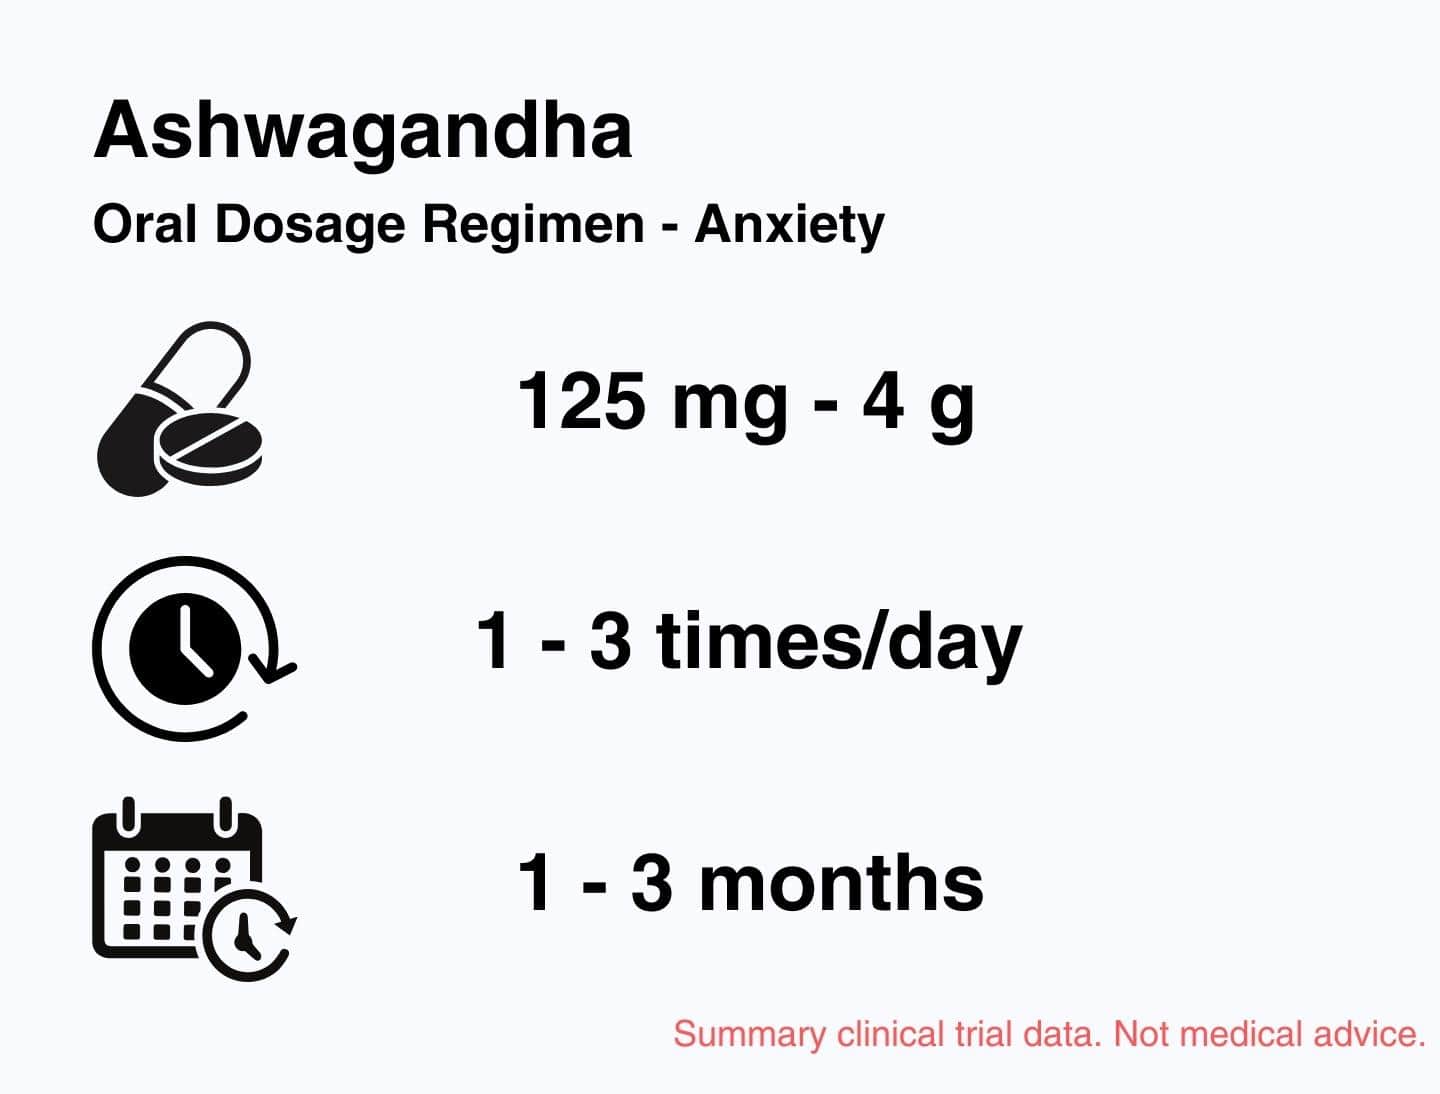 This image shows that The ashwagandha dose used for anxiety in clinical trials was 125 mg – 4 g, taken 1–3 times a day, for 1–3 months.